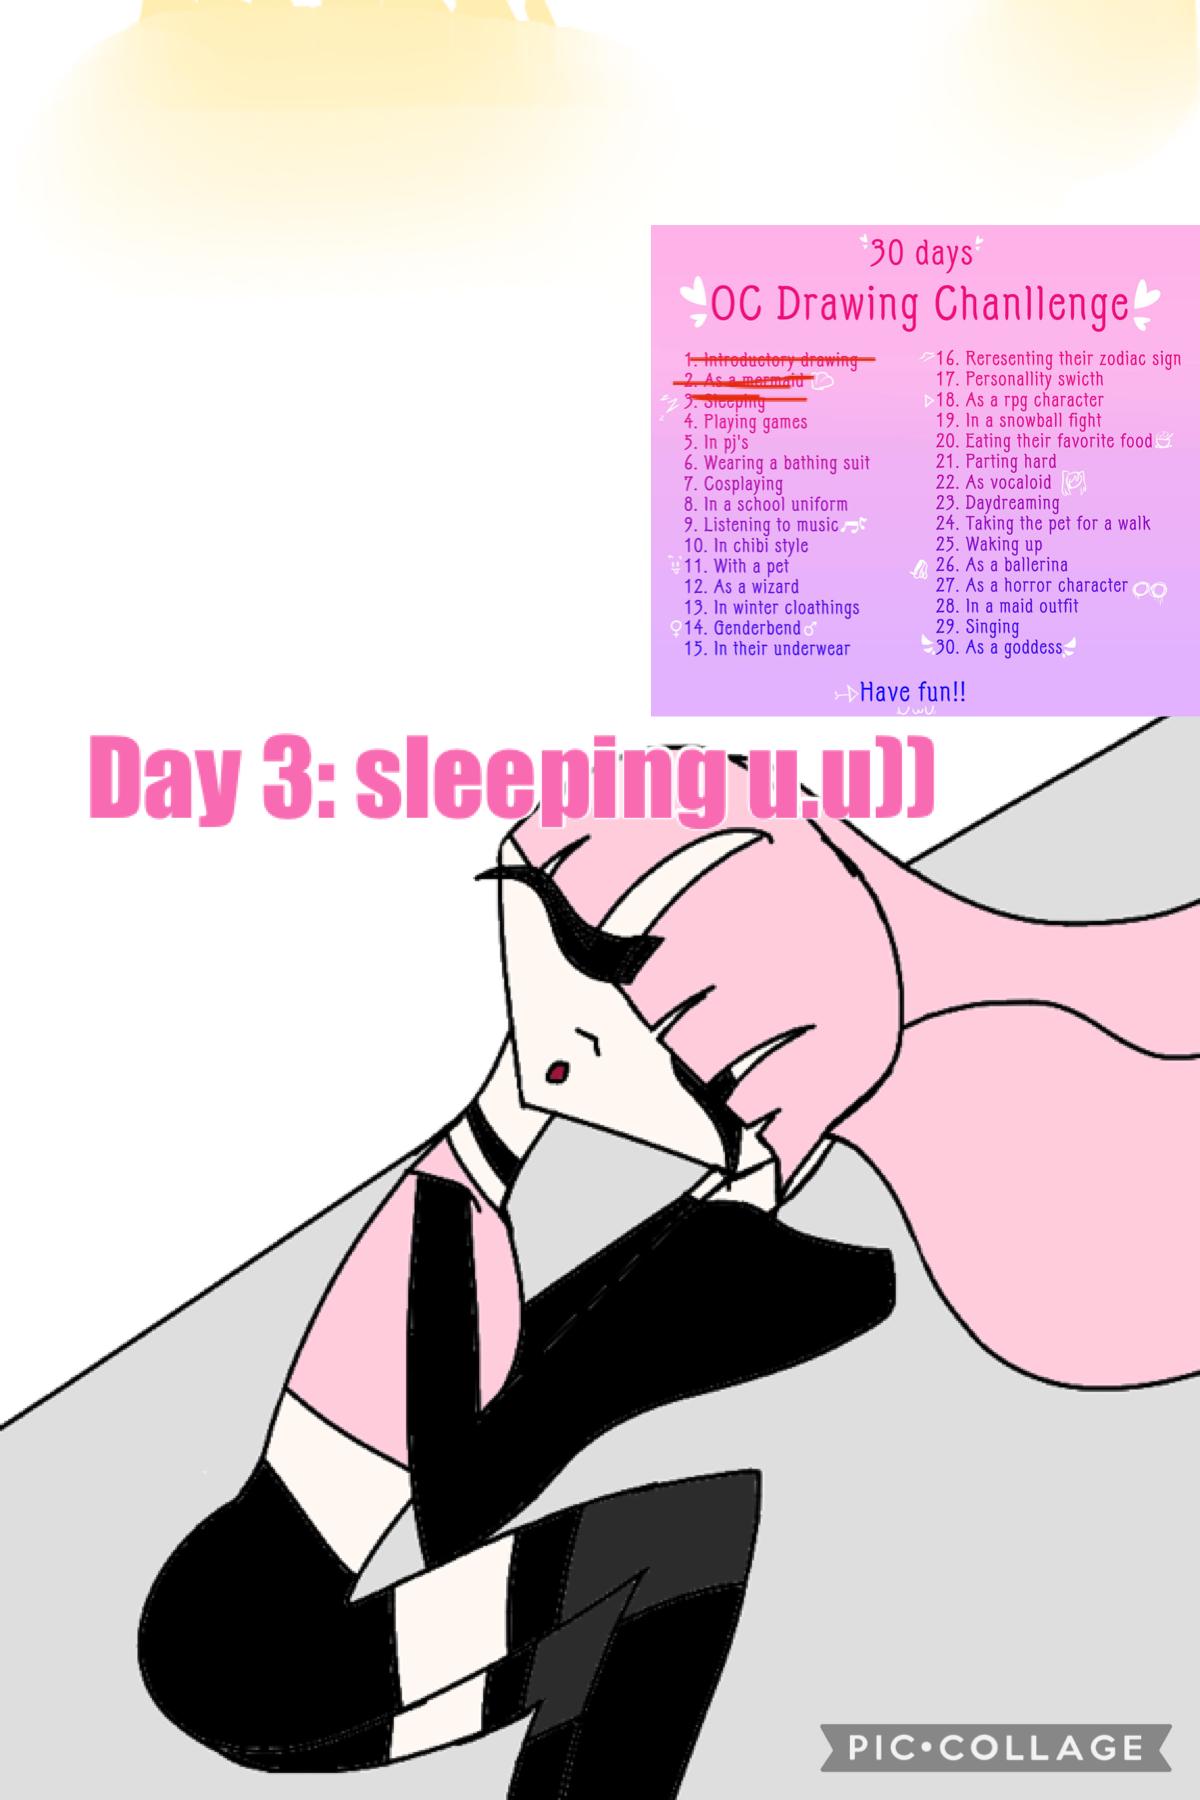 Day 3: sleeping u.u)) this is back when she was still being kept in a lab for experiments so she didn’t have a bed #anime #oc #art #kawaii #scifi